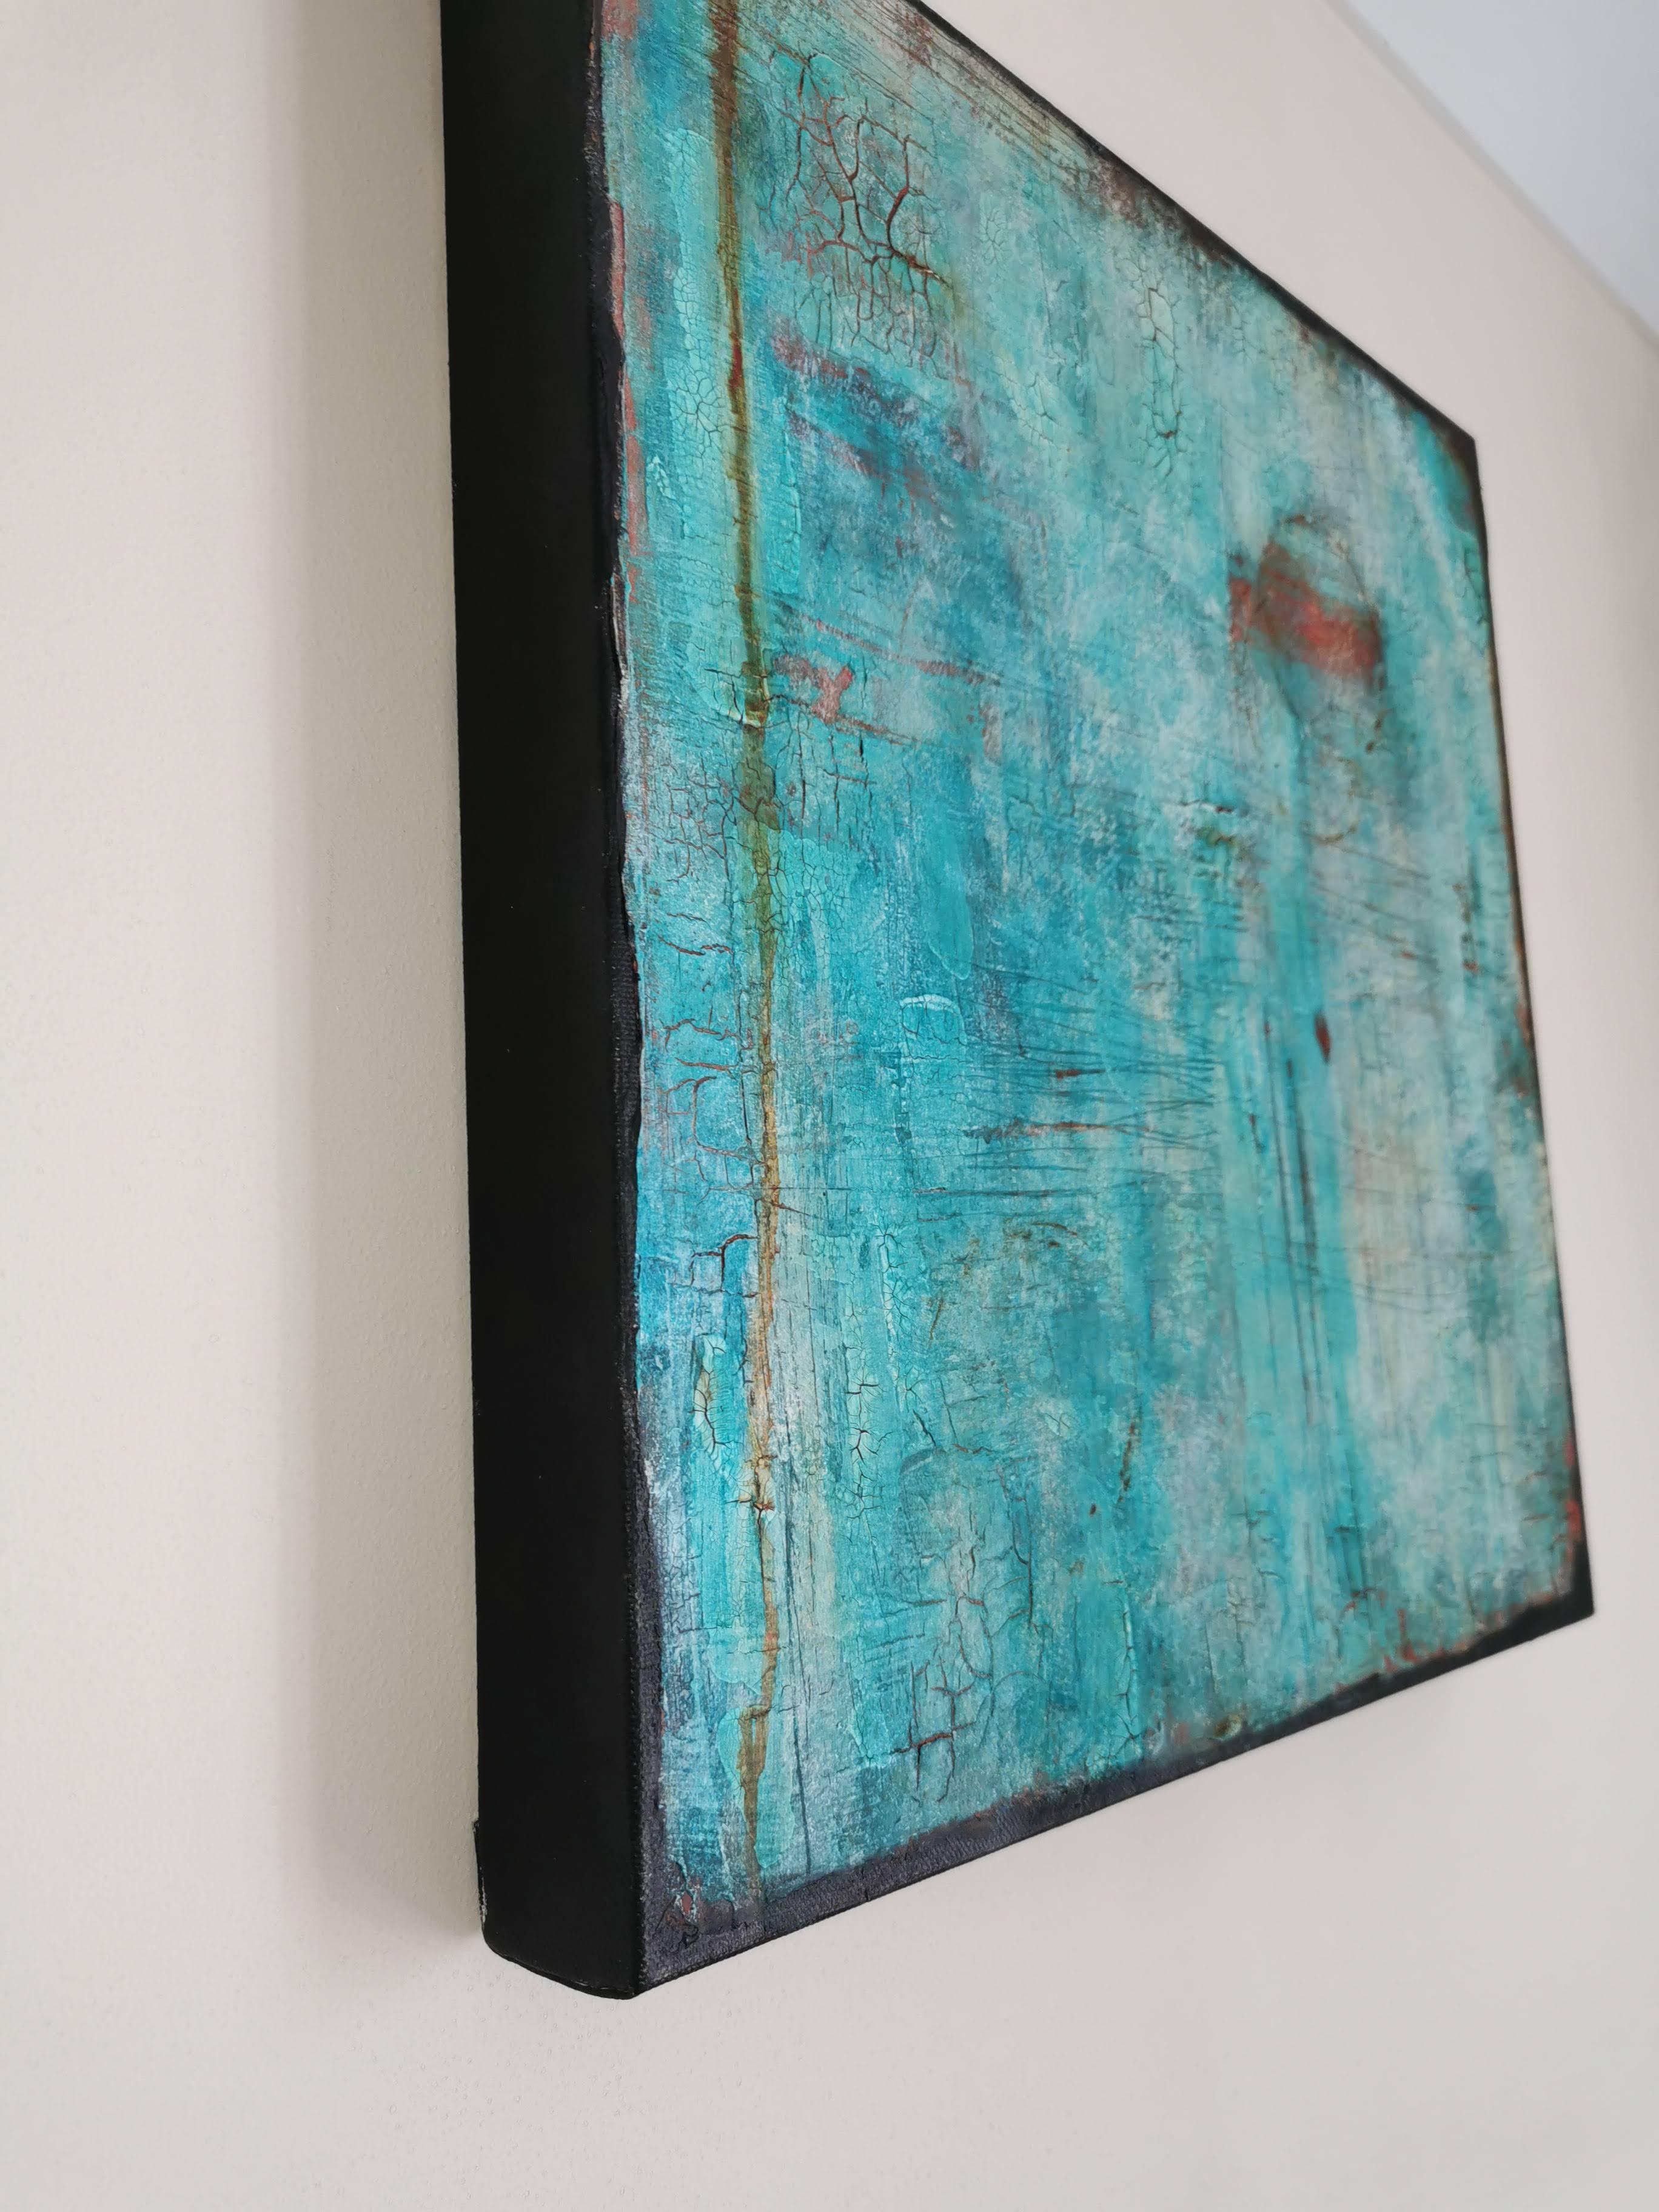  Shelly describes this painting thus; “This one is quite grungy. To me it speaks of a relationship breaking up/down or perhaps oneself…”

Signed on reverse to allow hanging in any orientation.

It would make a great diptych with Feeling That